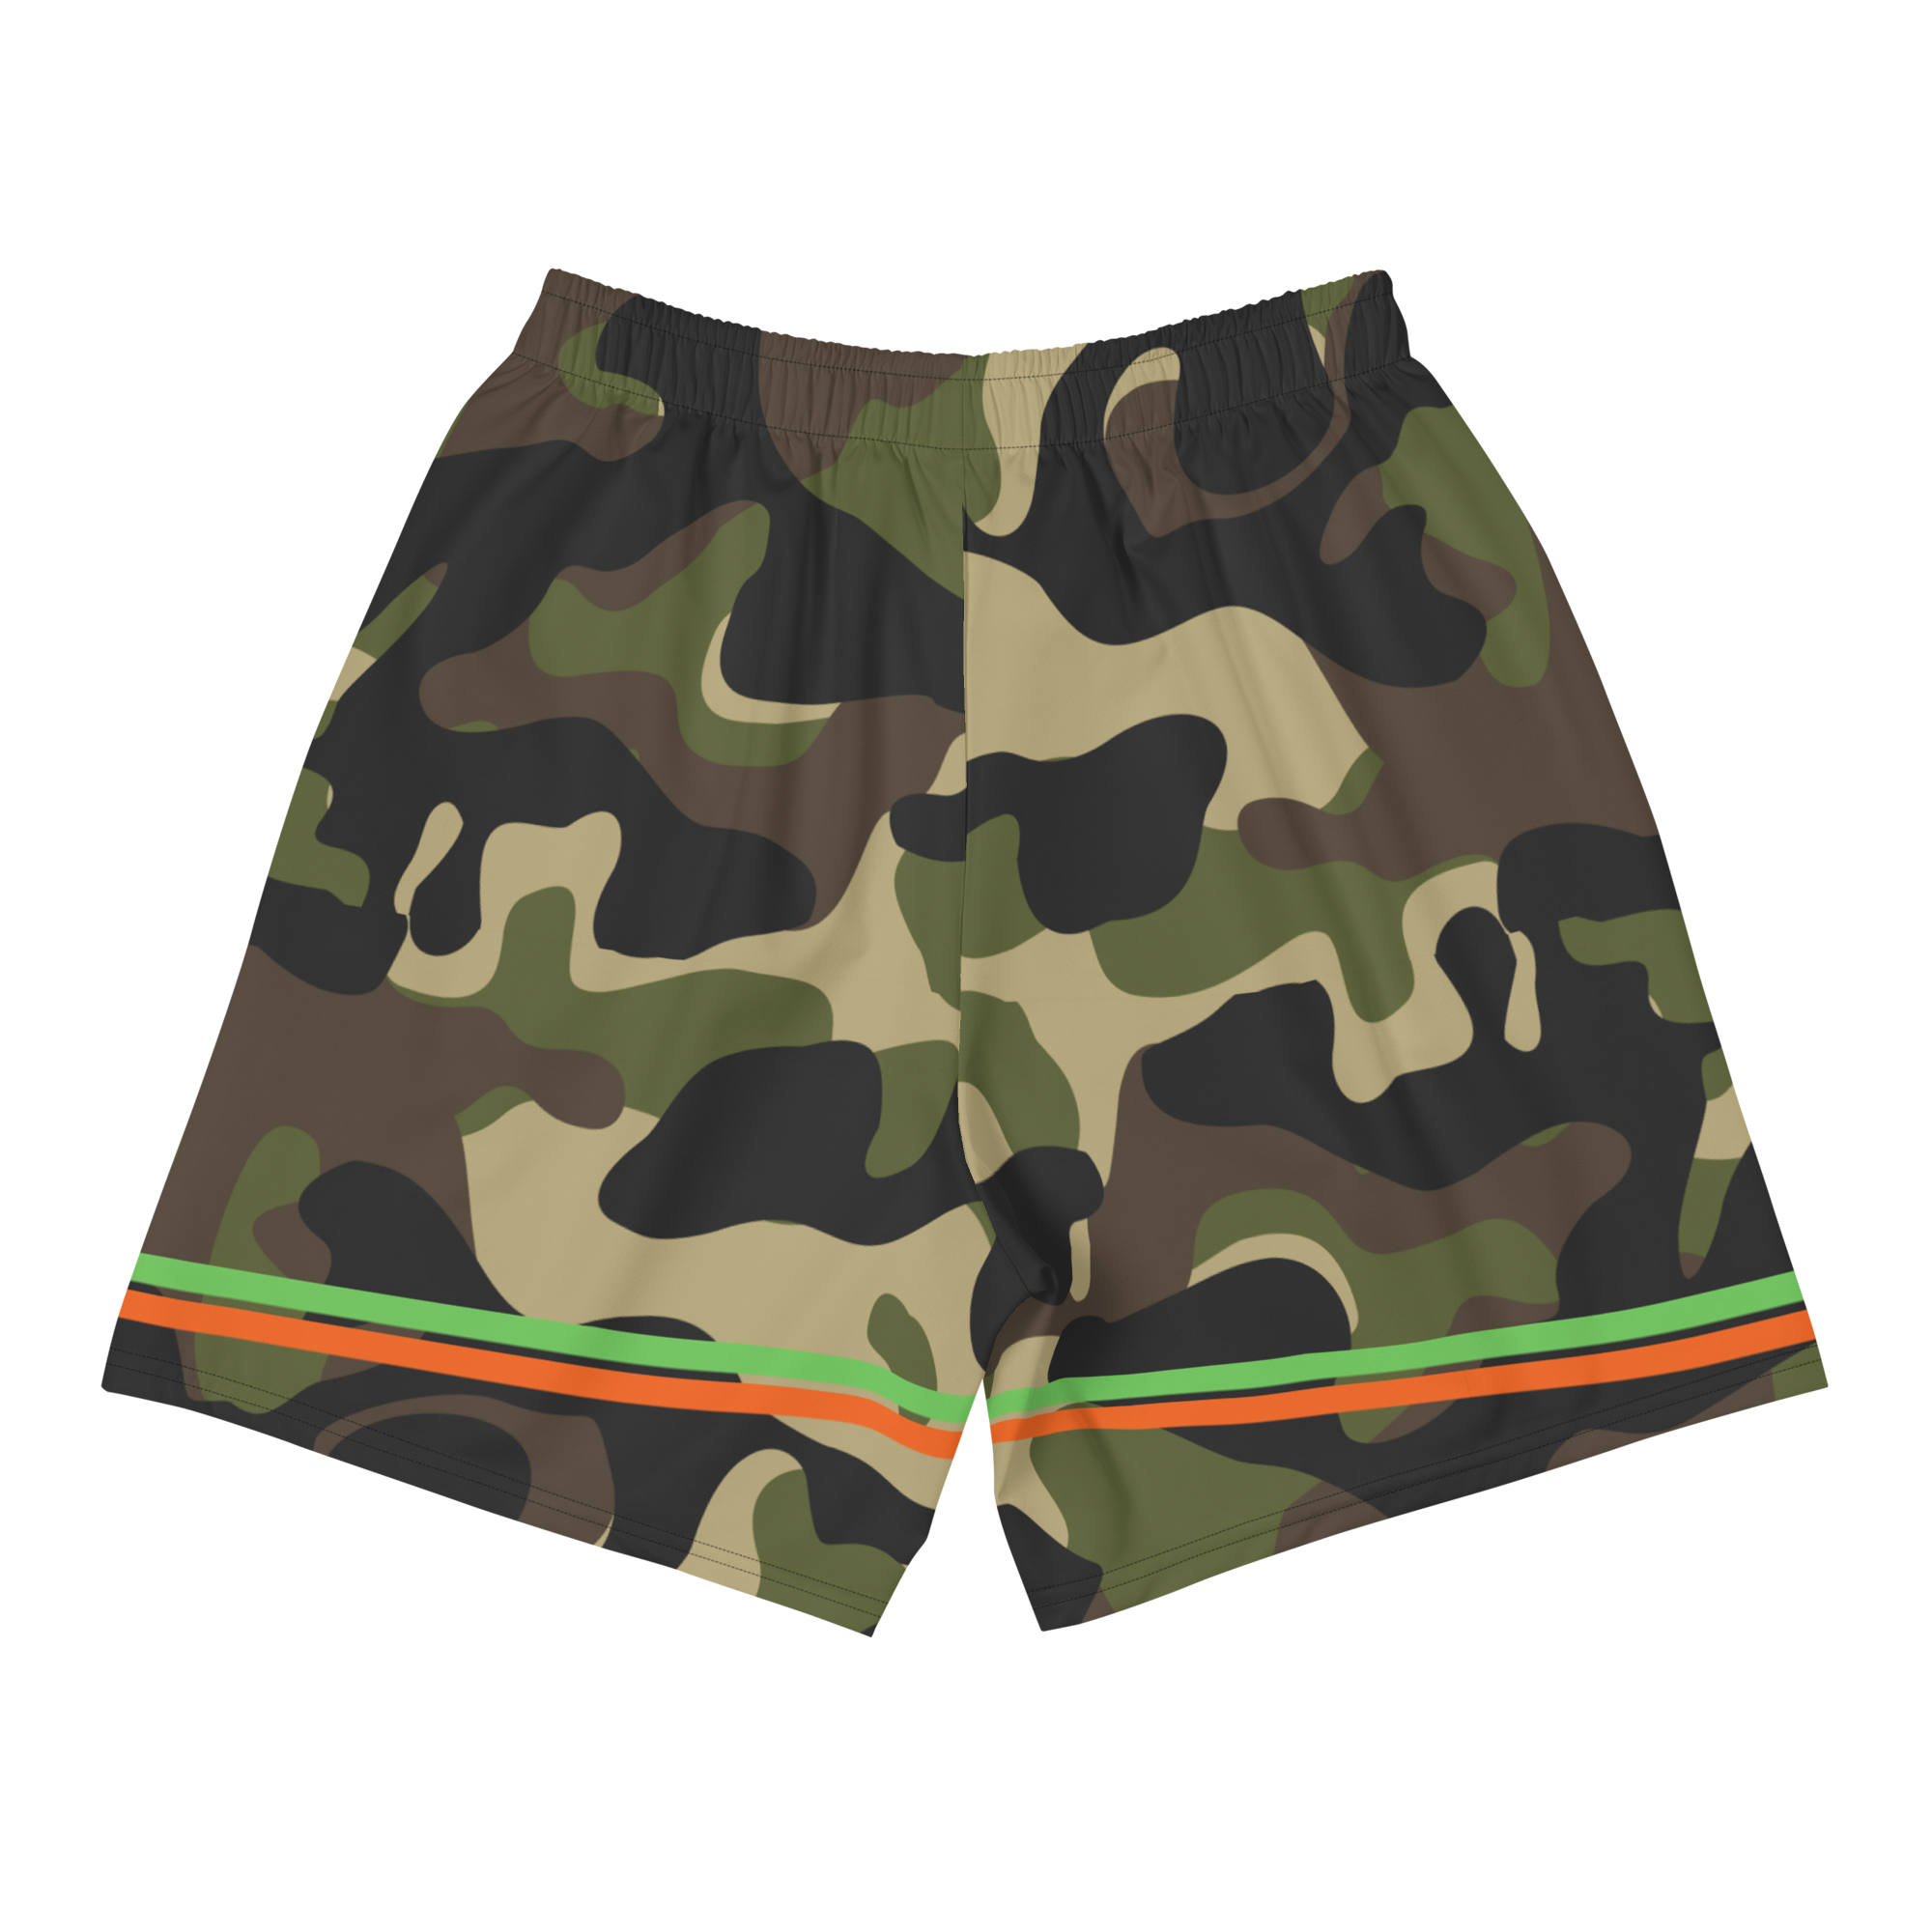 U Can't See Me - Recycled Athletic Shorts